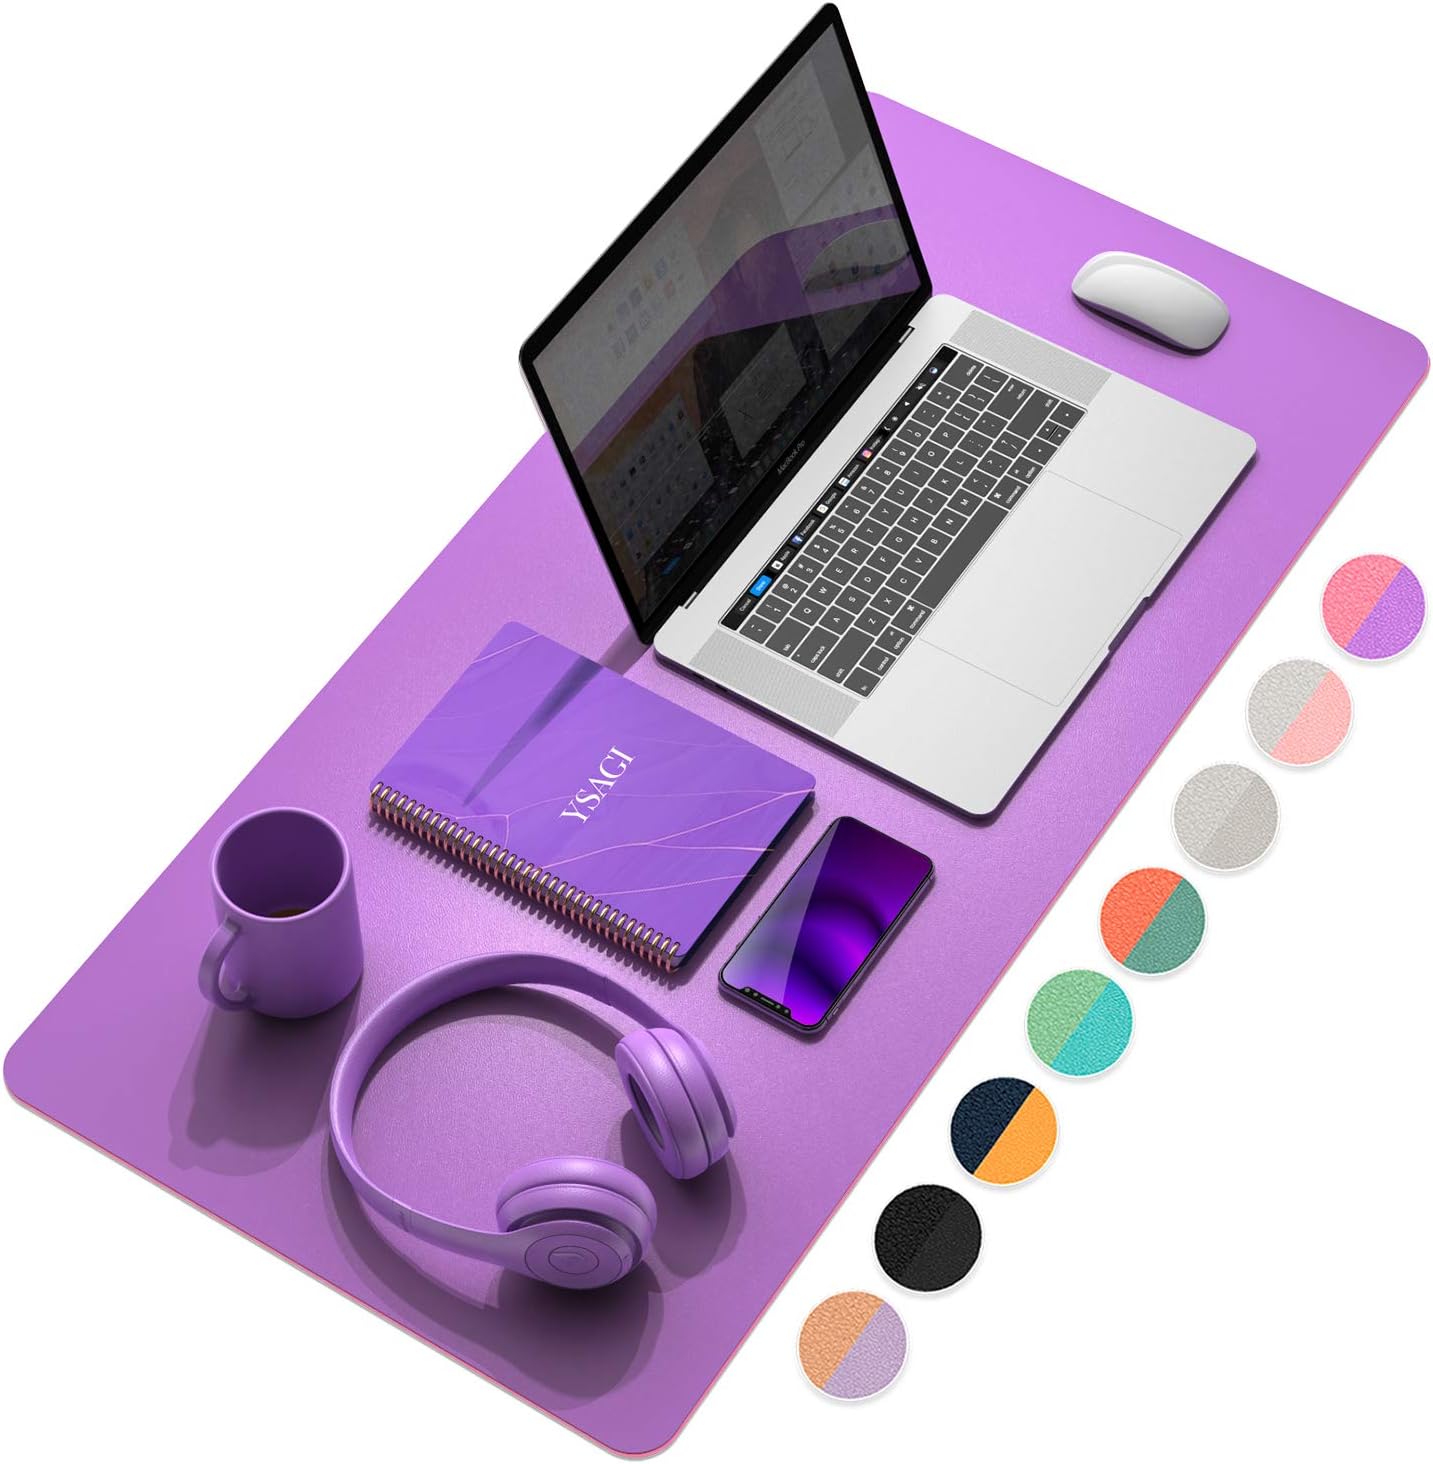 YSAGi Multifunctional Office Desk Pad, Ultra Thin Waterproof PU Leather Mouse Pad, Dual Use Desk Writing Mat for Office/Home (31.5" x 15.7", Aconite Violet+Eosine Pink)